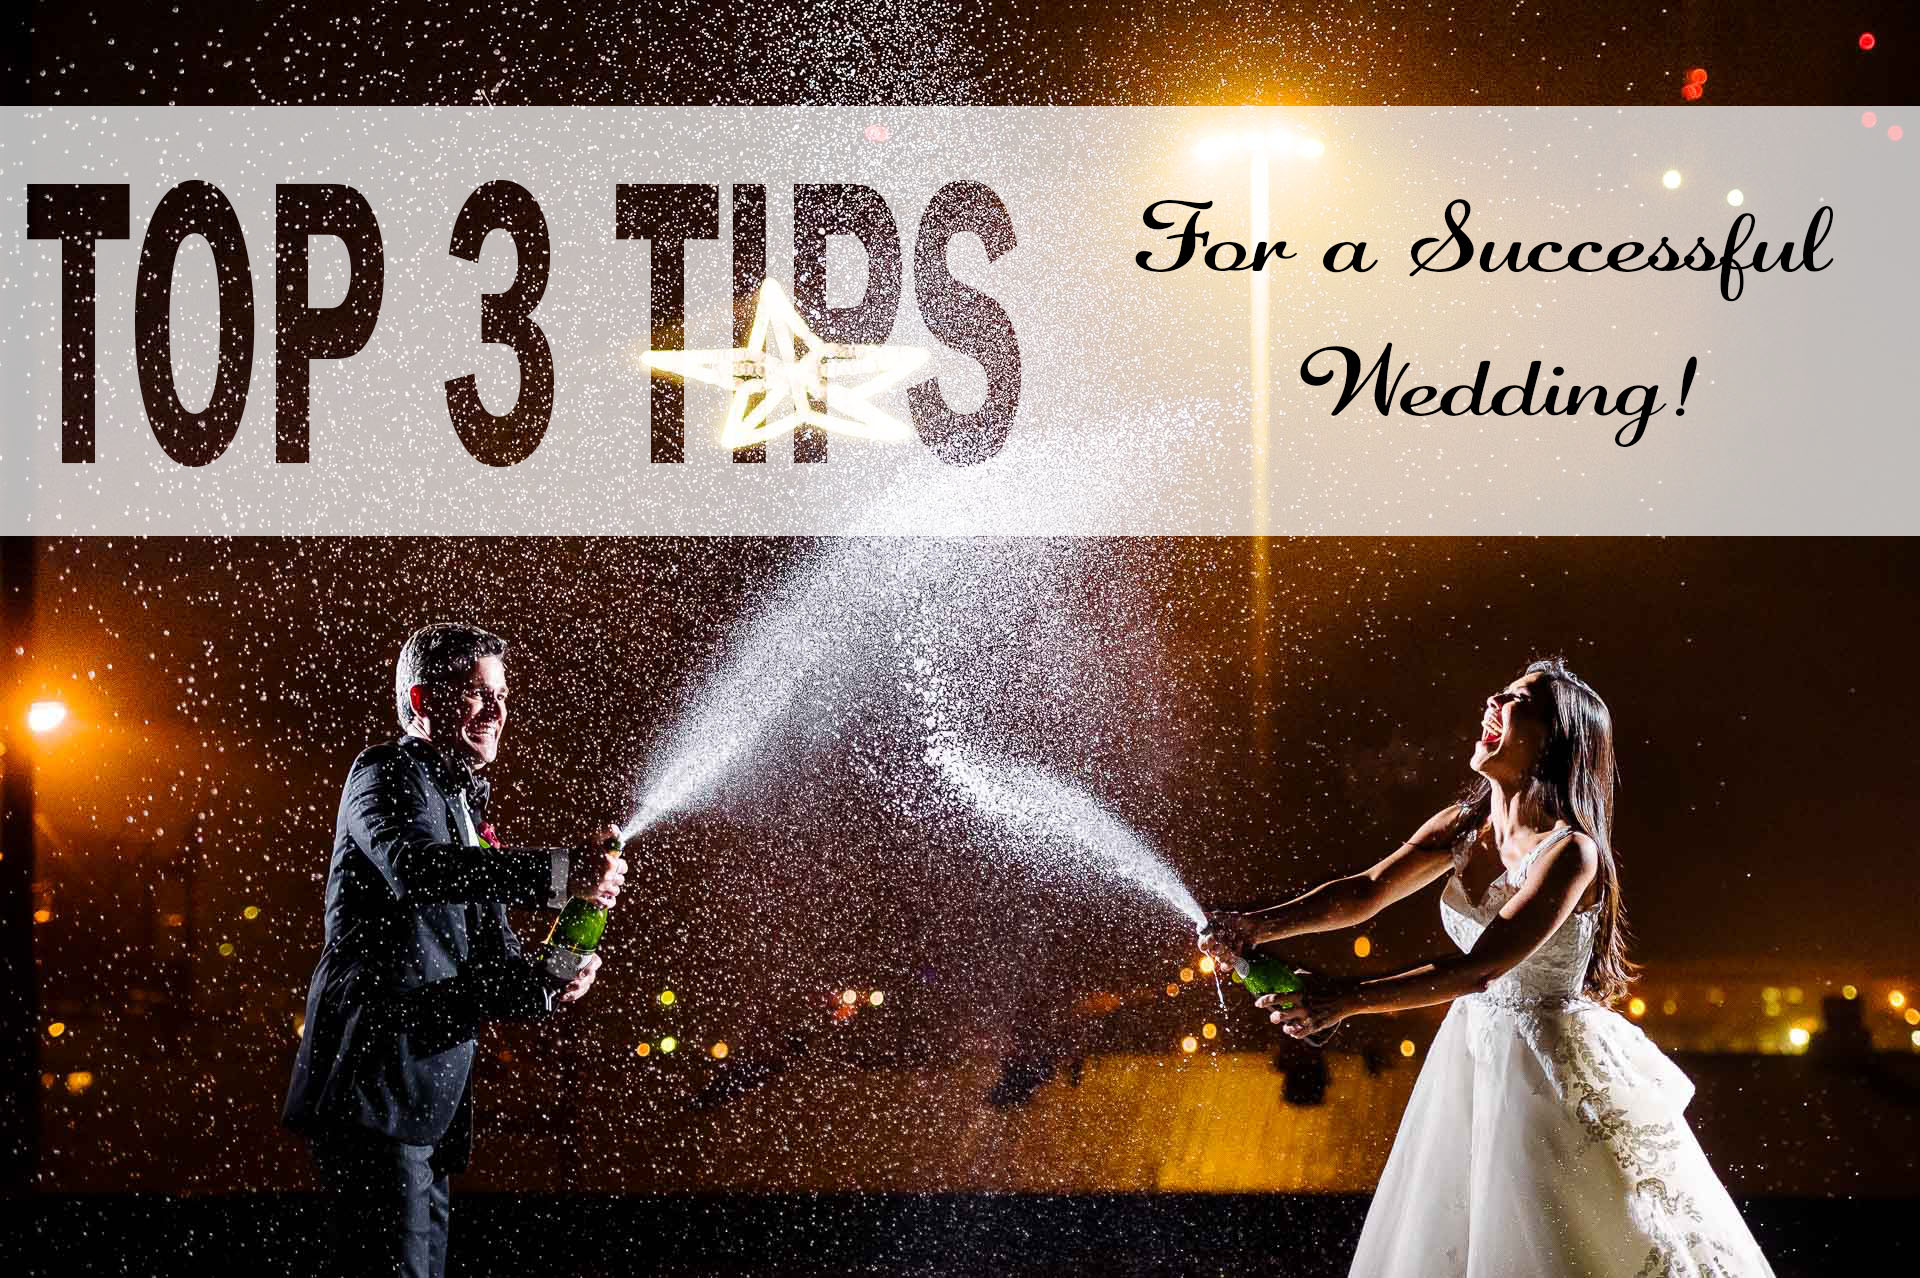 Top 3 tips for a successful wedding